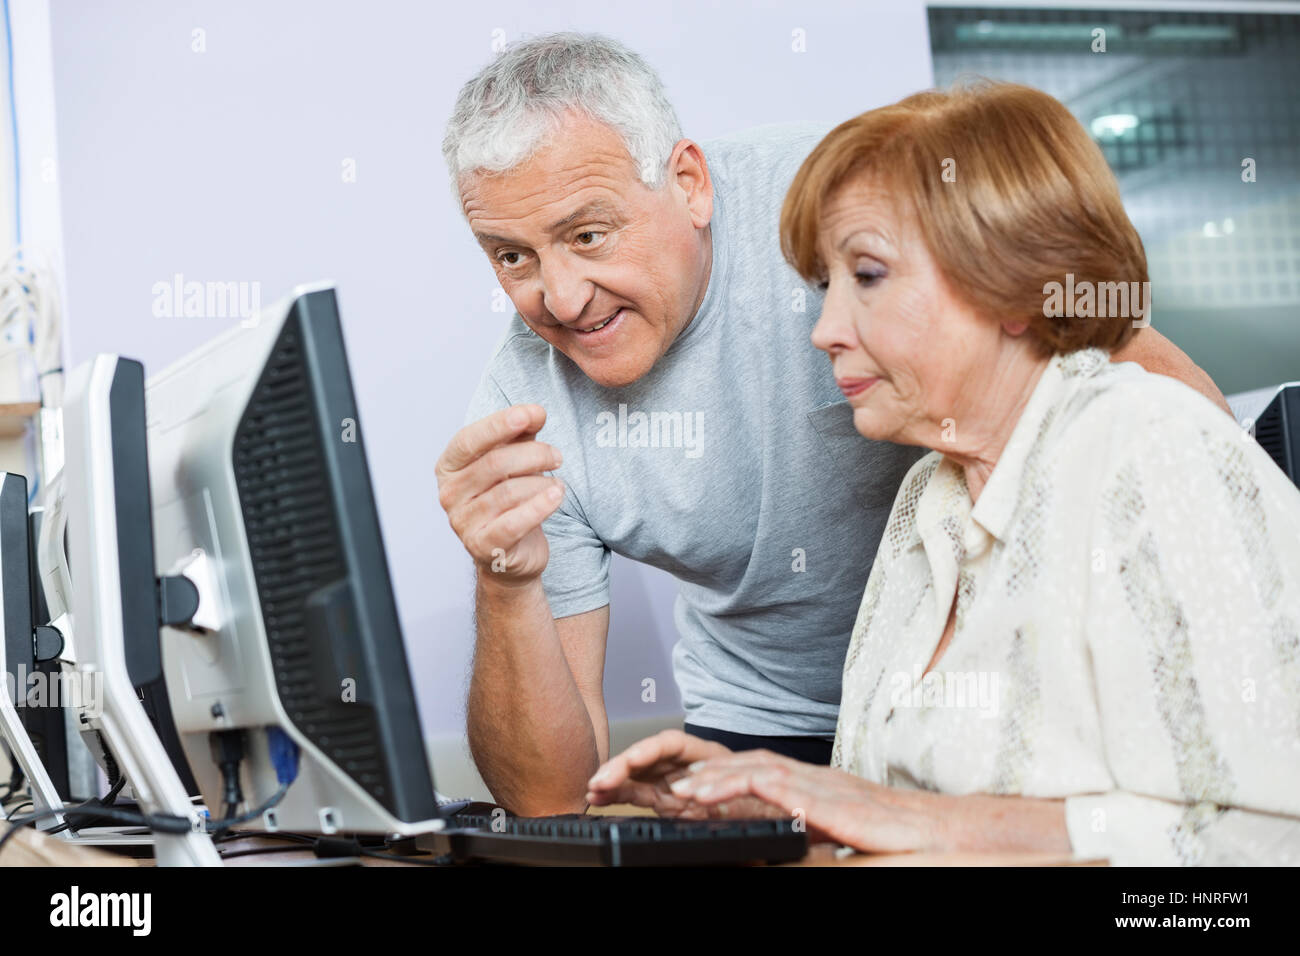 Senior Man Assisting Woman In Computer Class Stock Photo